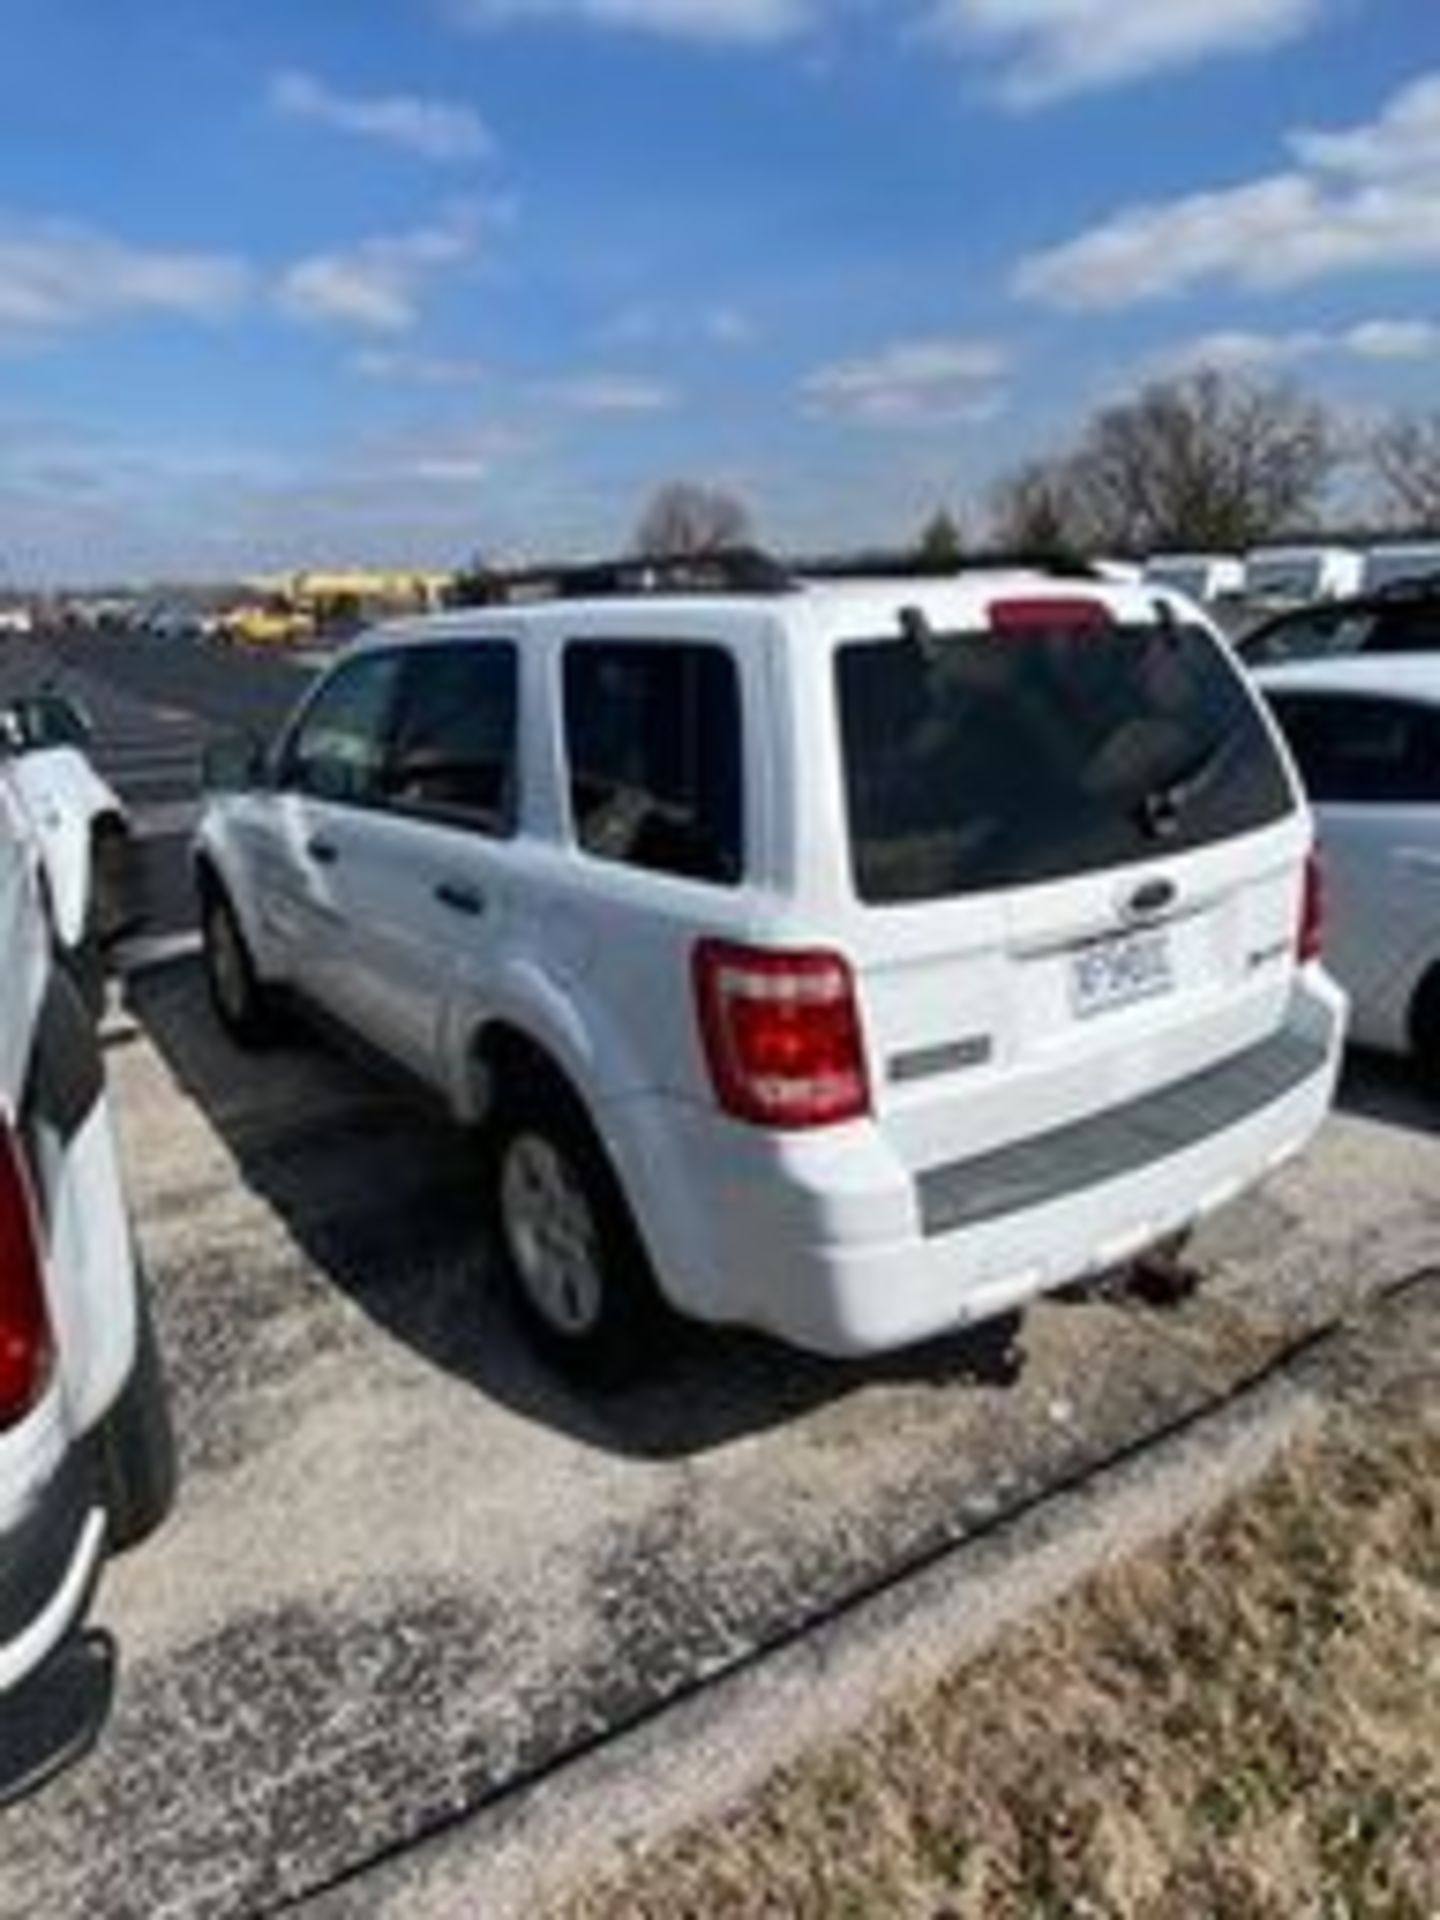 2009 Ford Escape Hybrid - Image 7 of 8